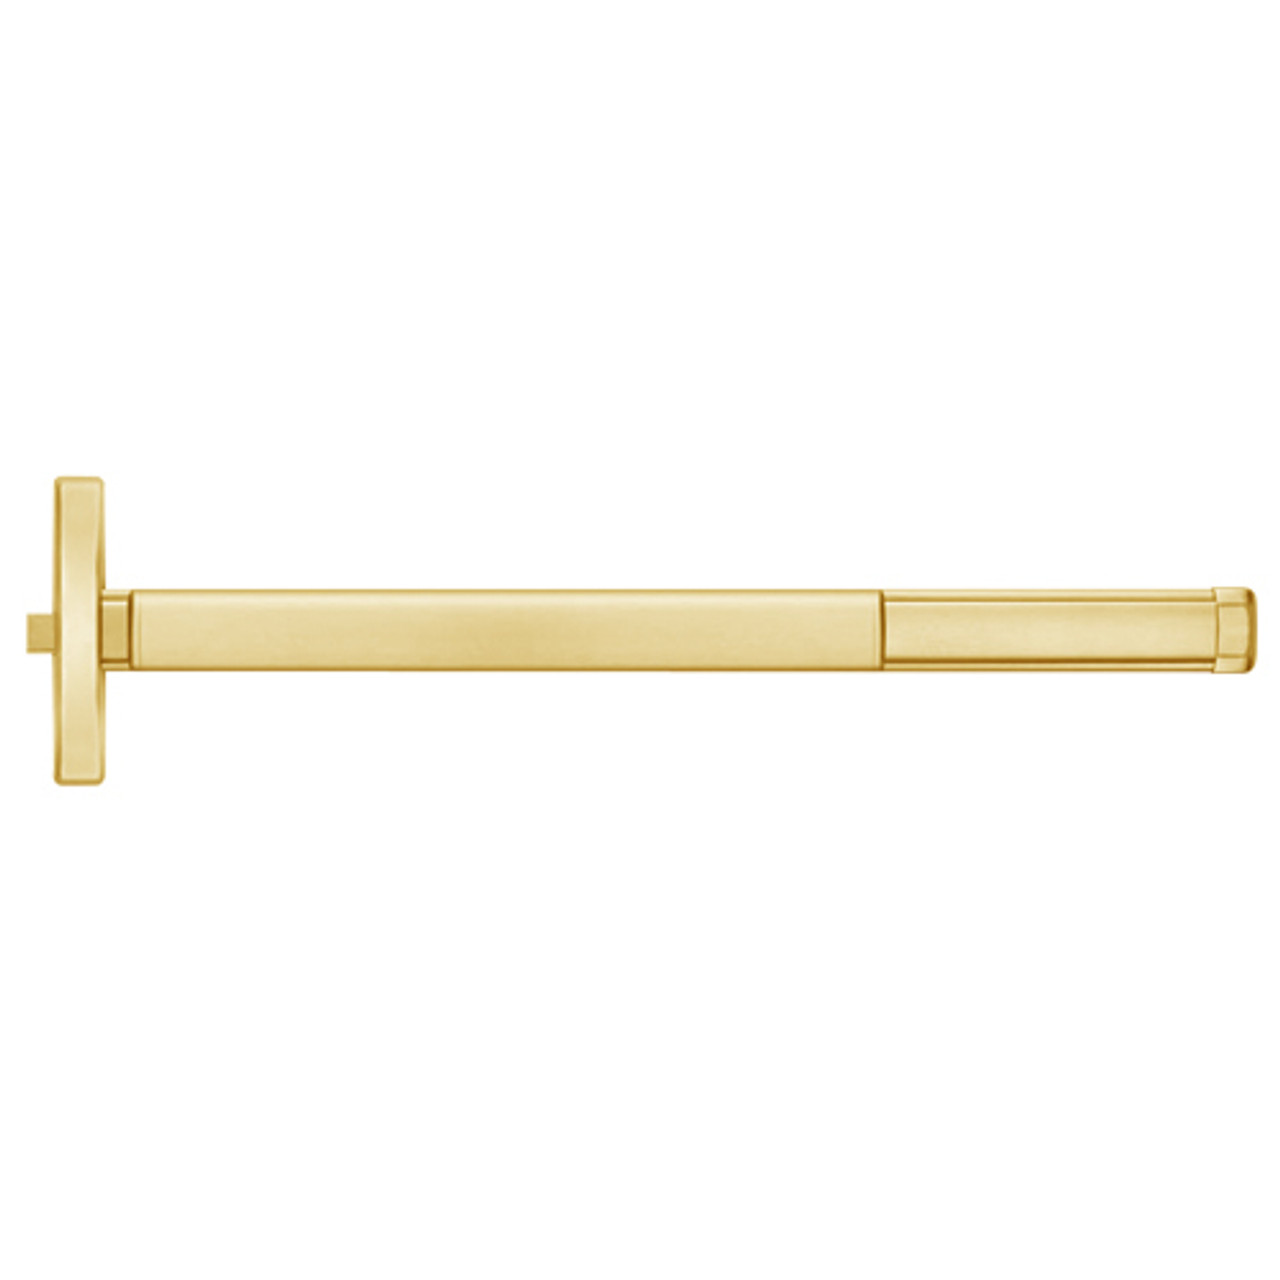 DEFL2408-605-36 PHI 2400 Series Fire Rated Apex Rim Exit Device with Delayed Egress Prepped for Key Controls Lever in Bright Brass Finish